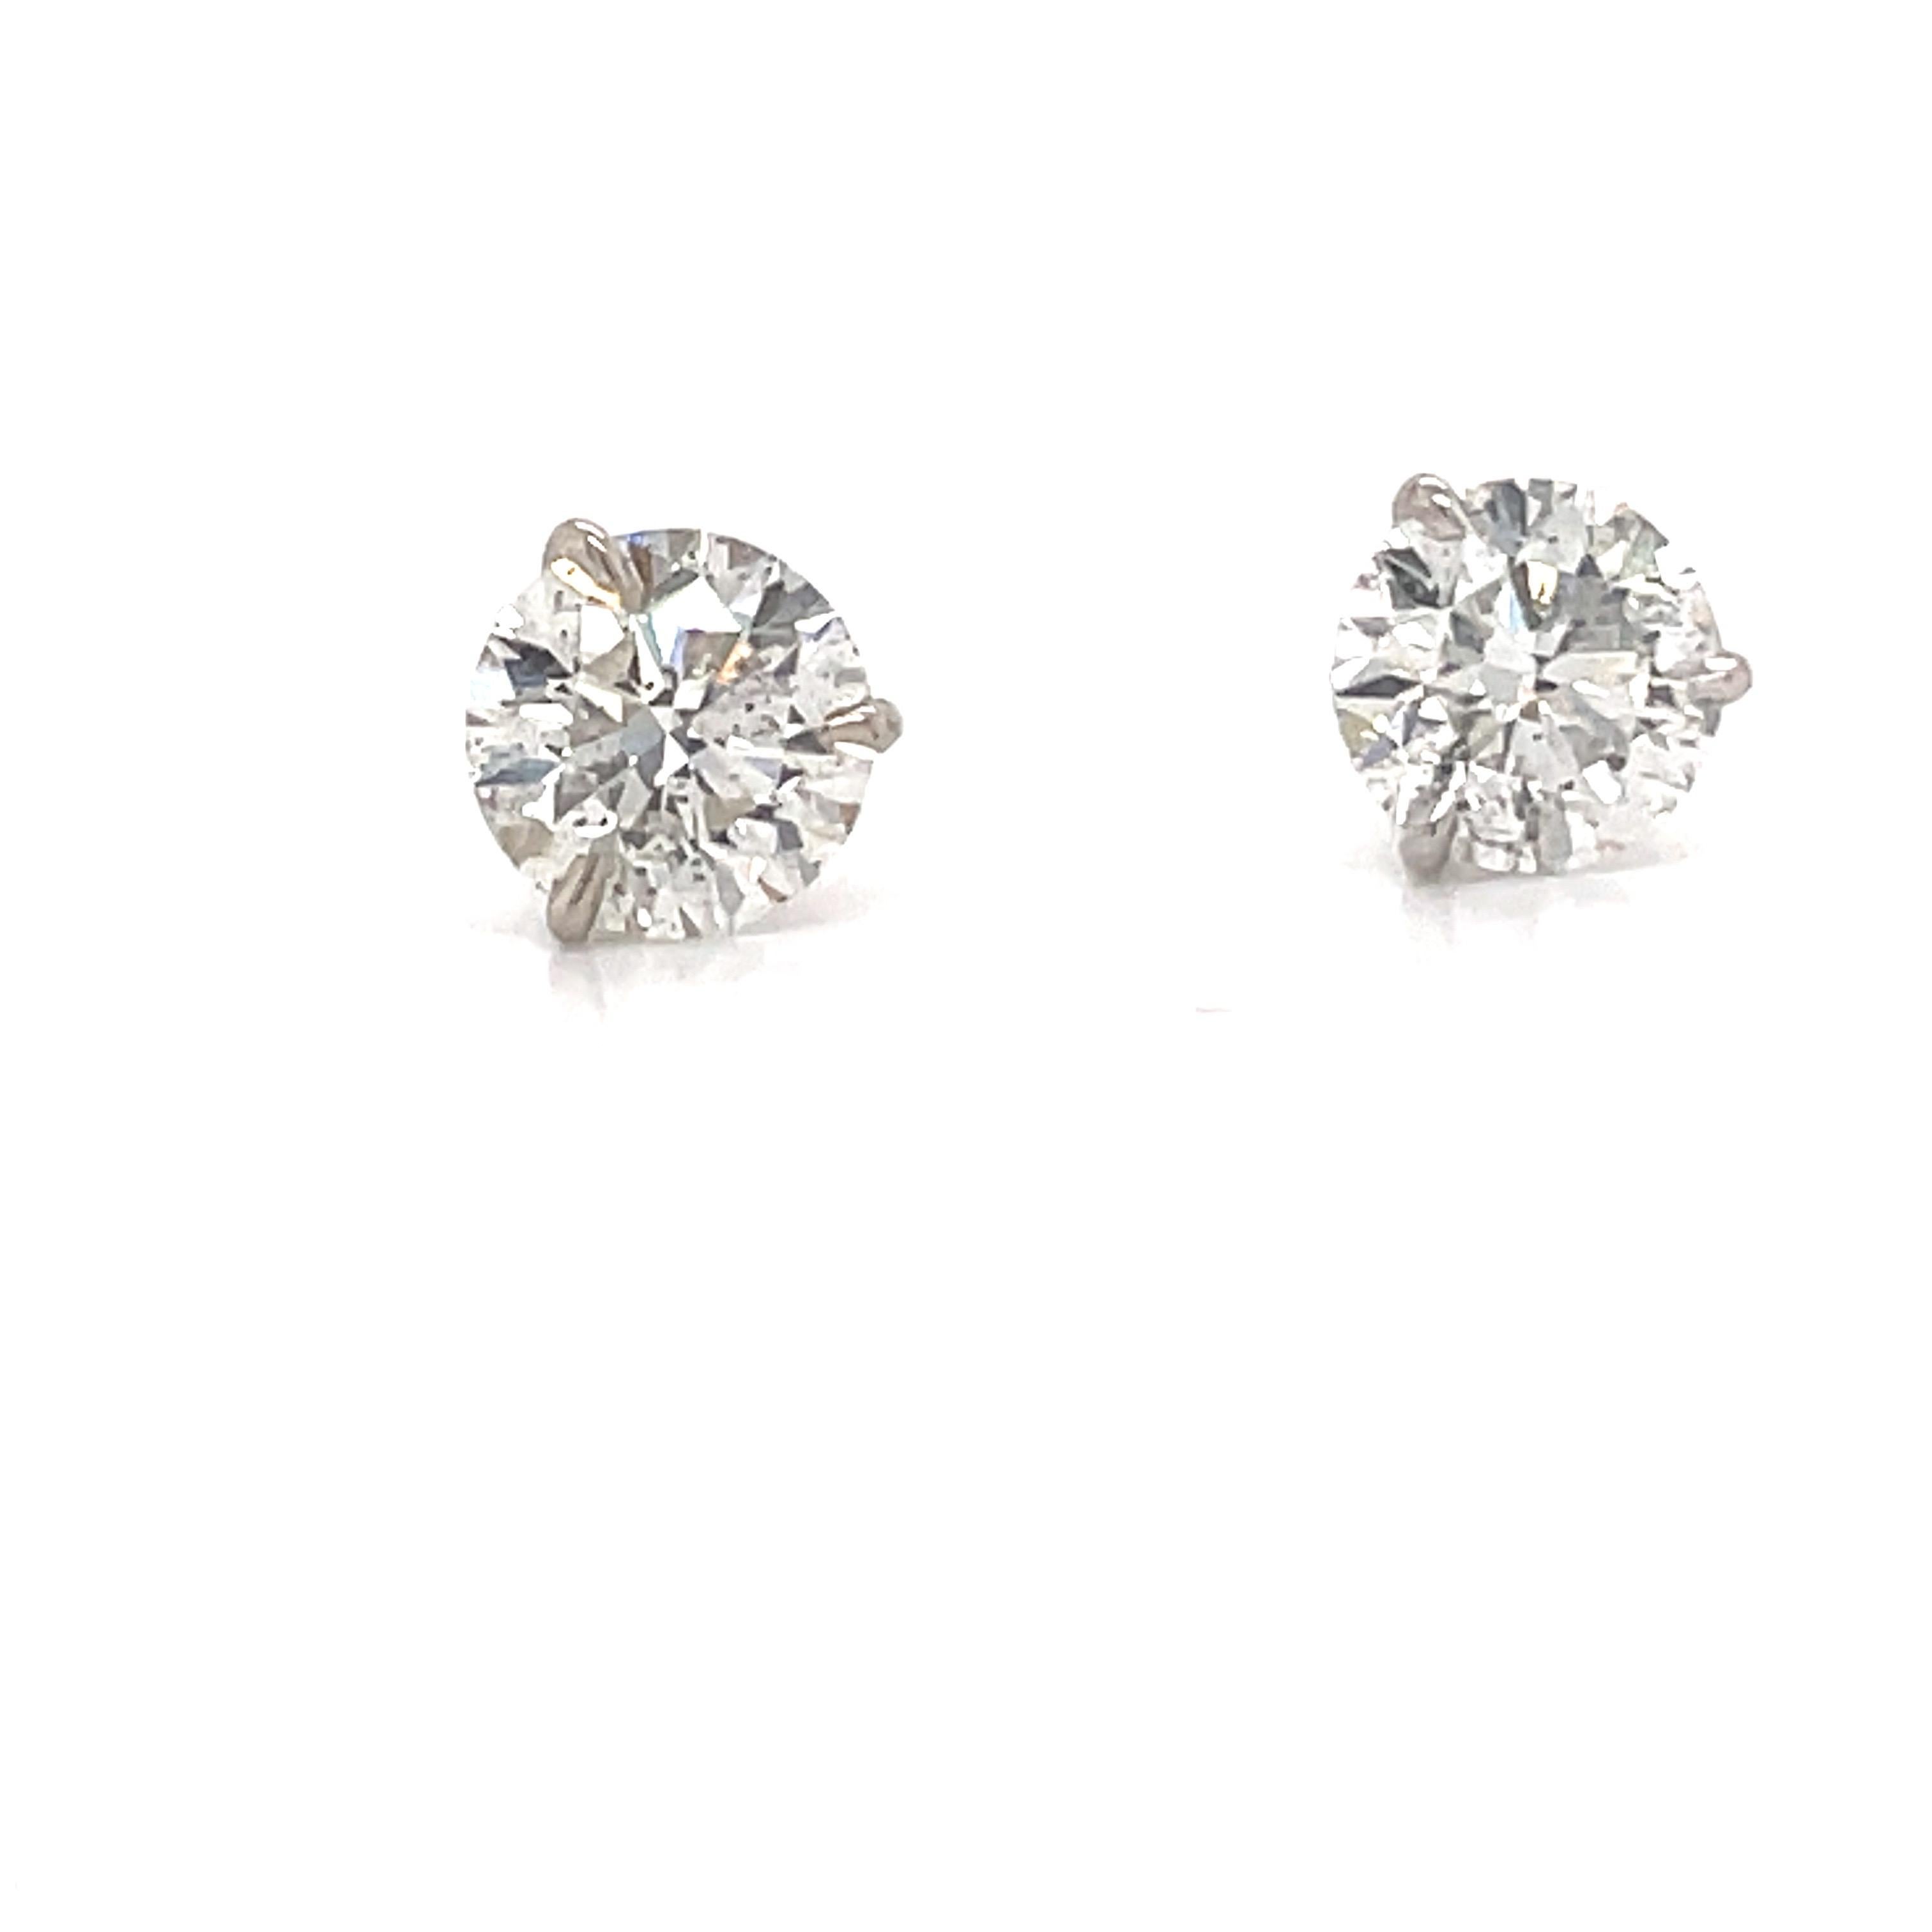 Diamond stud earrings weighing 4.06 carats in a 3 prong champagne setting, 18k white gold. 
Color G-H
Clarity SI3-I1